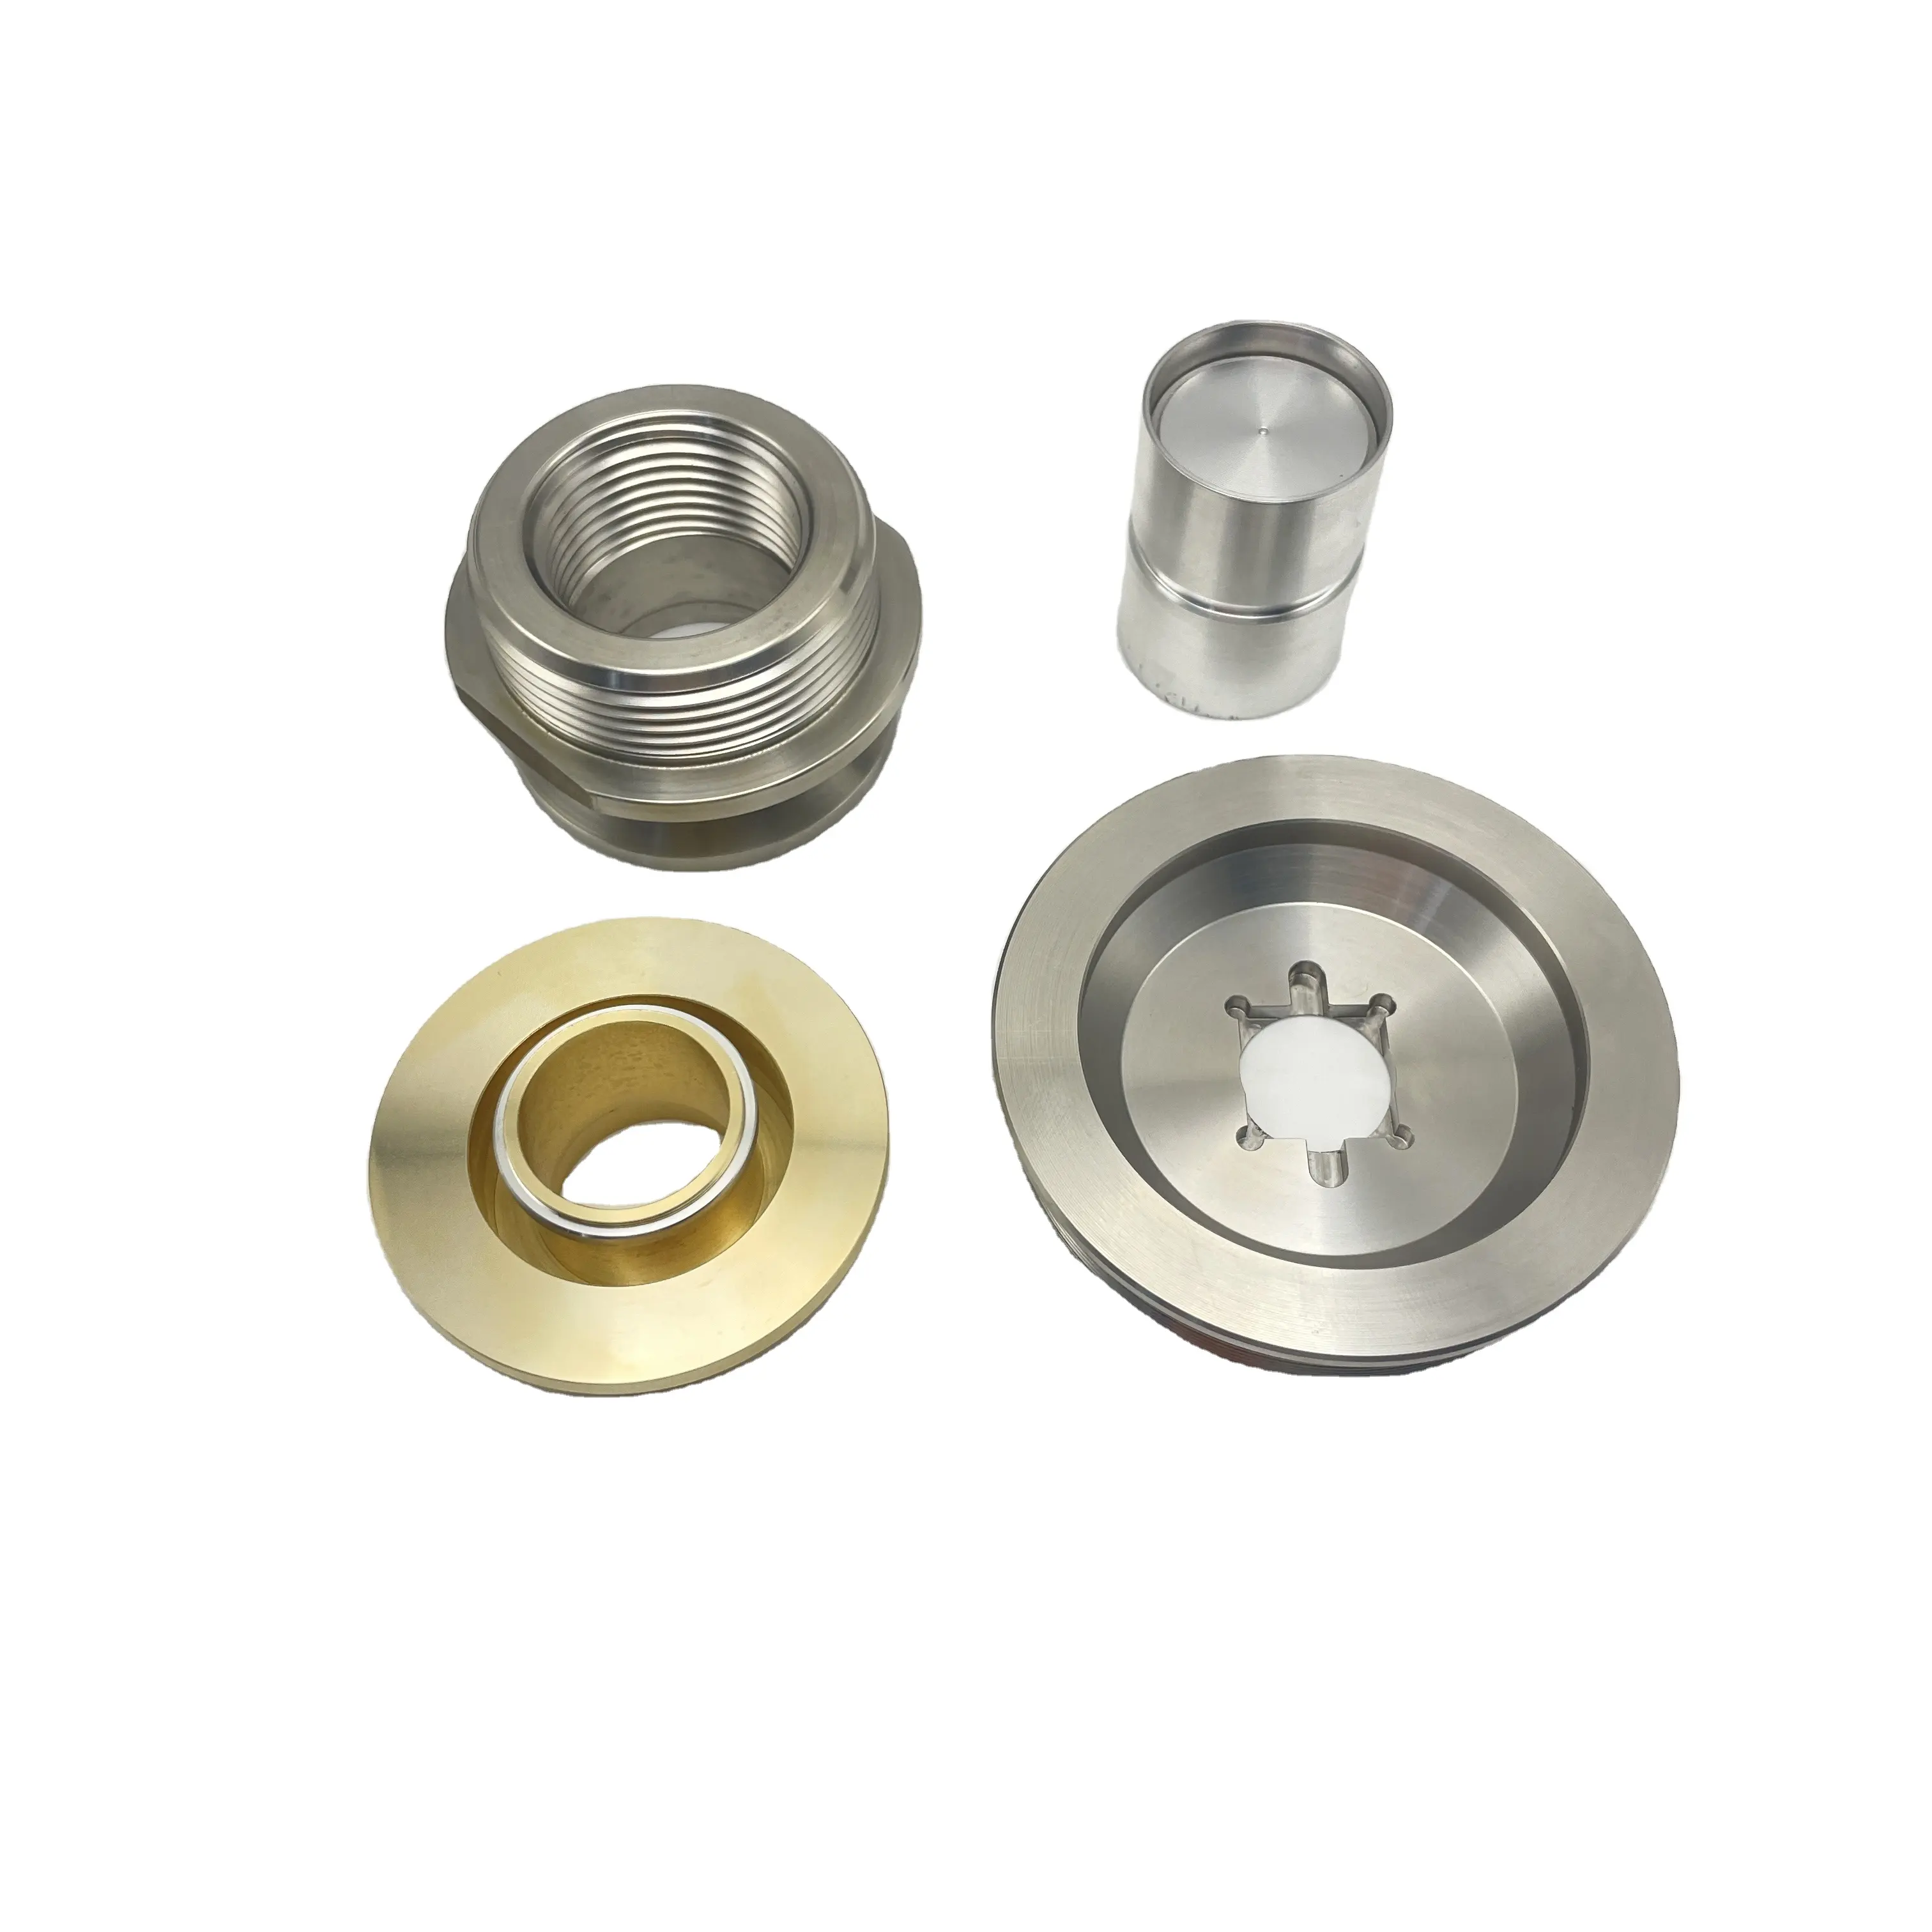 CNC Metal Milling service Aluminum Machine Shops Customized Non-standard Machinery Parts Micro Machined Motorcycle Parts